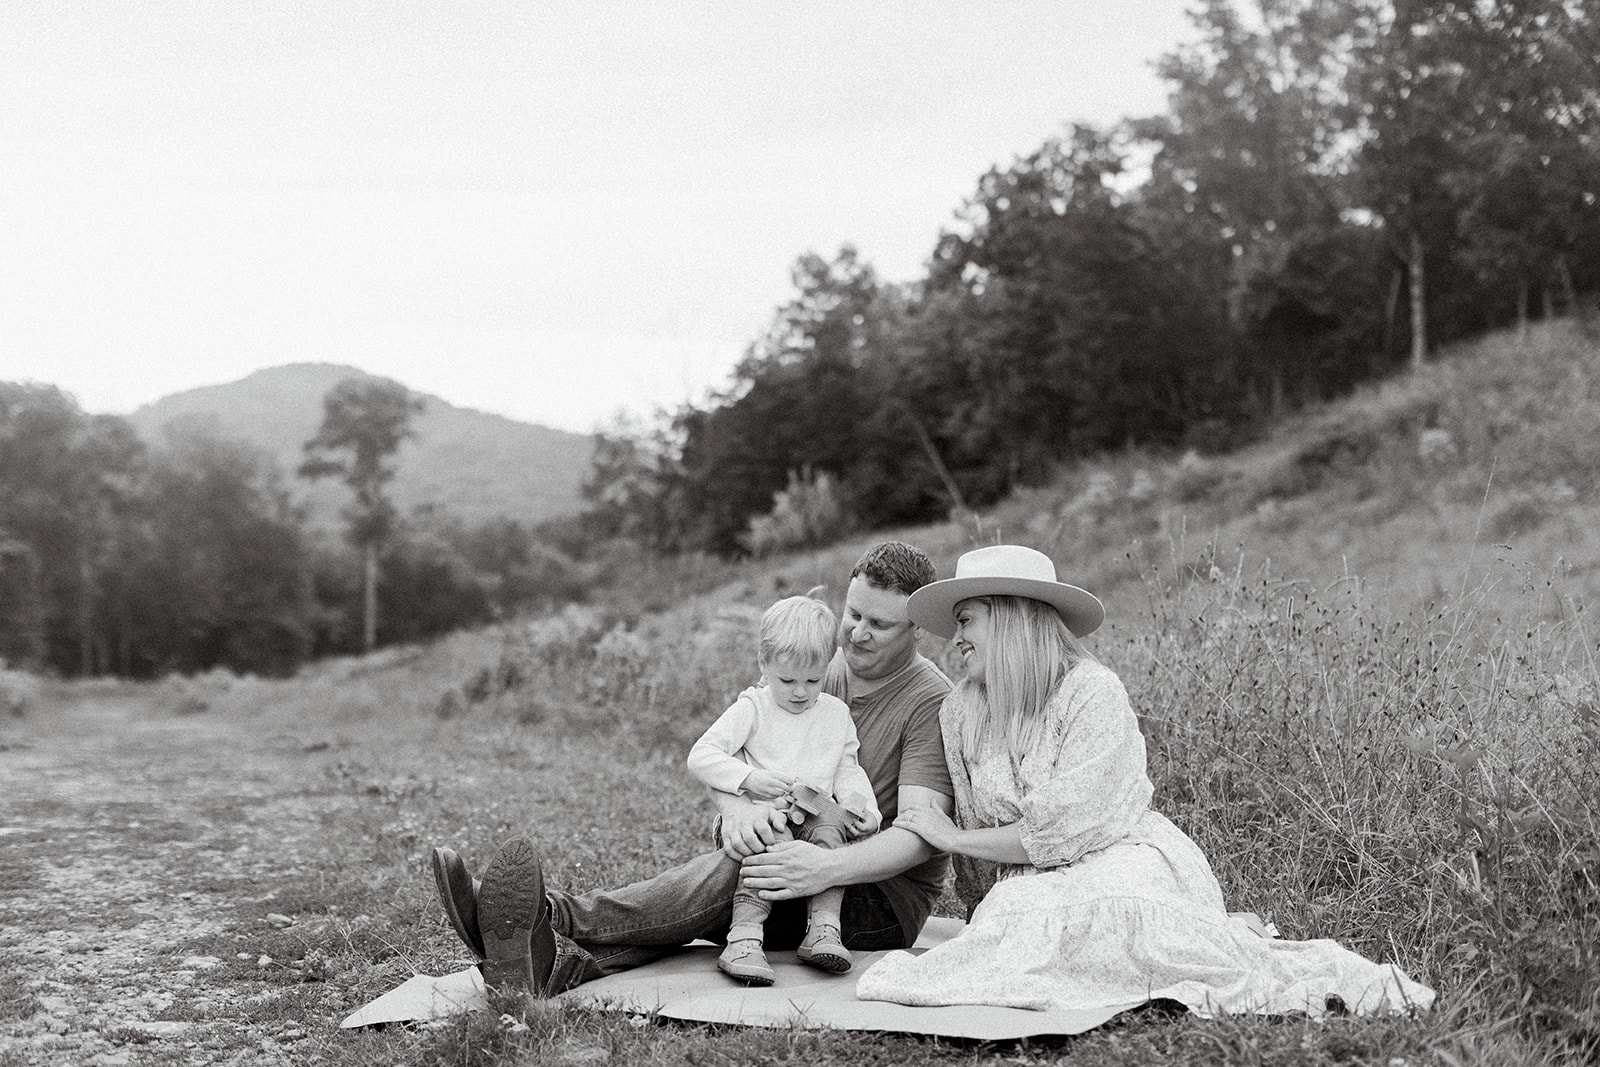 outdoor family session in nashville tennessee. black and white family photo